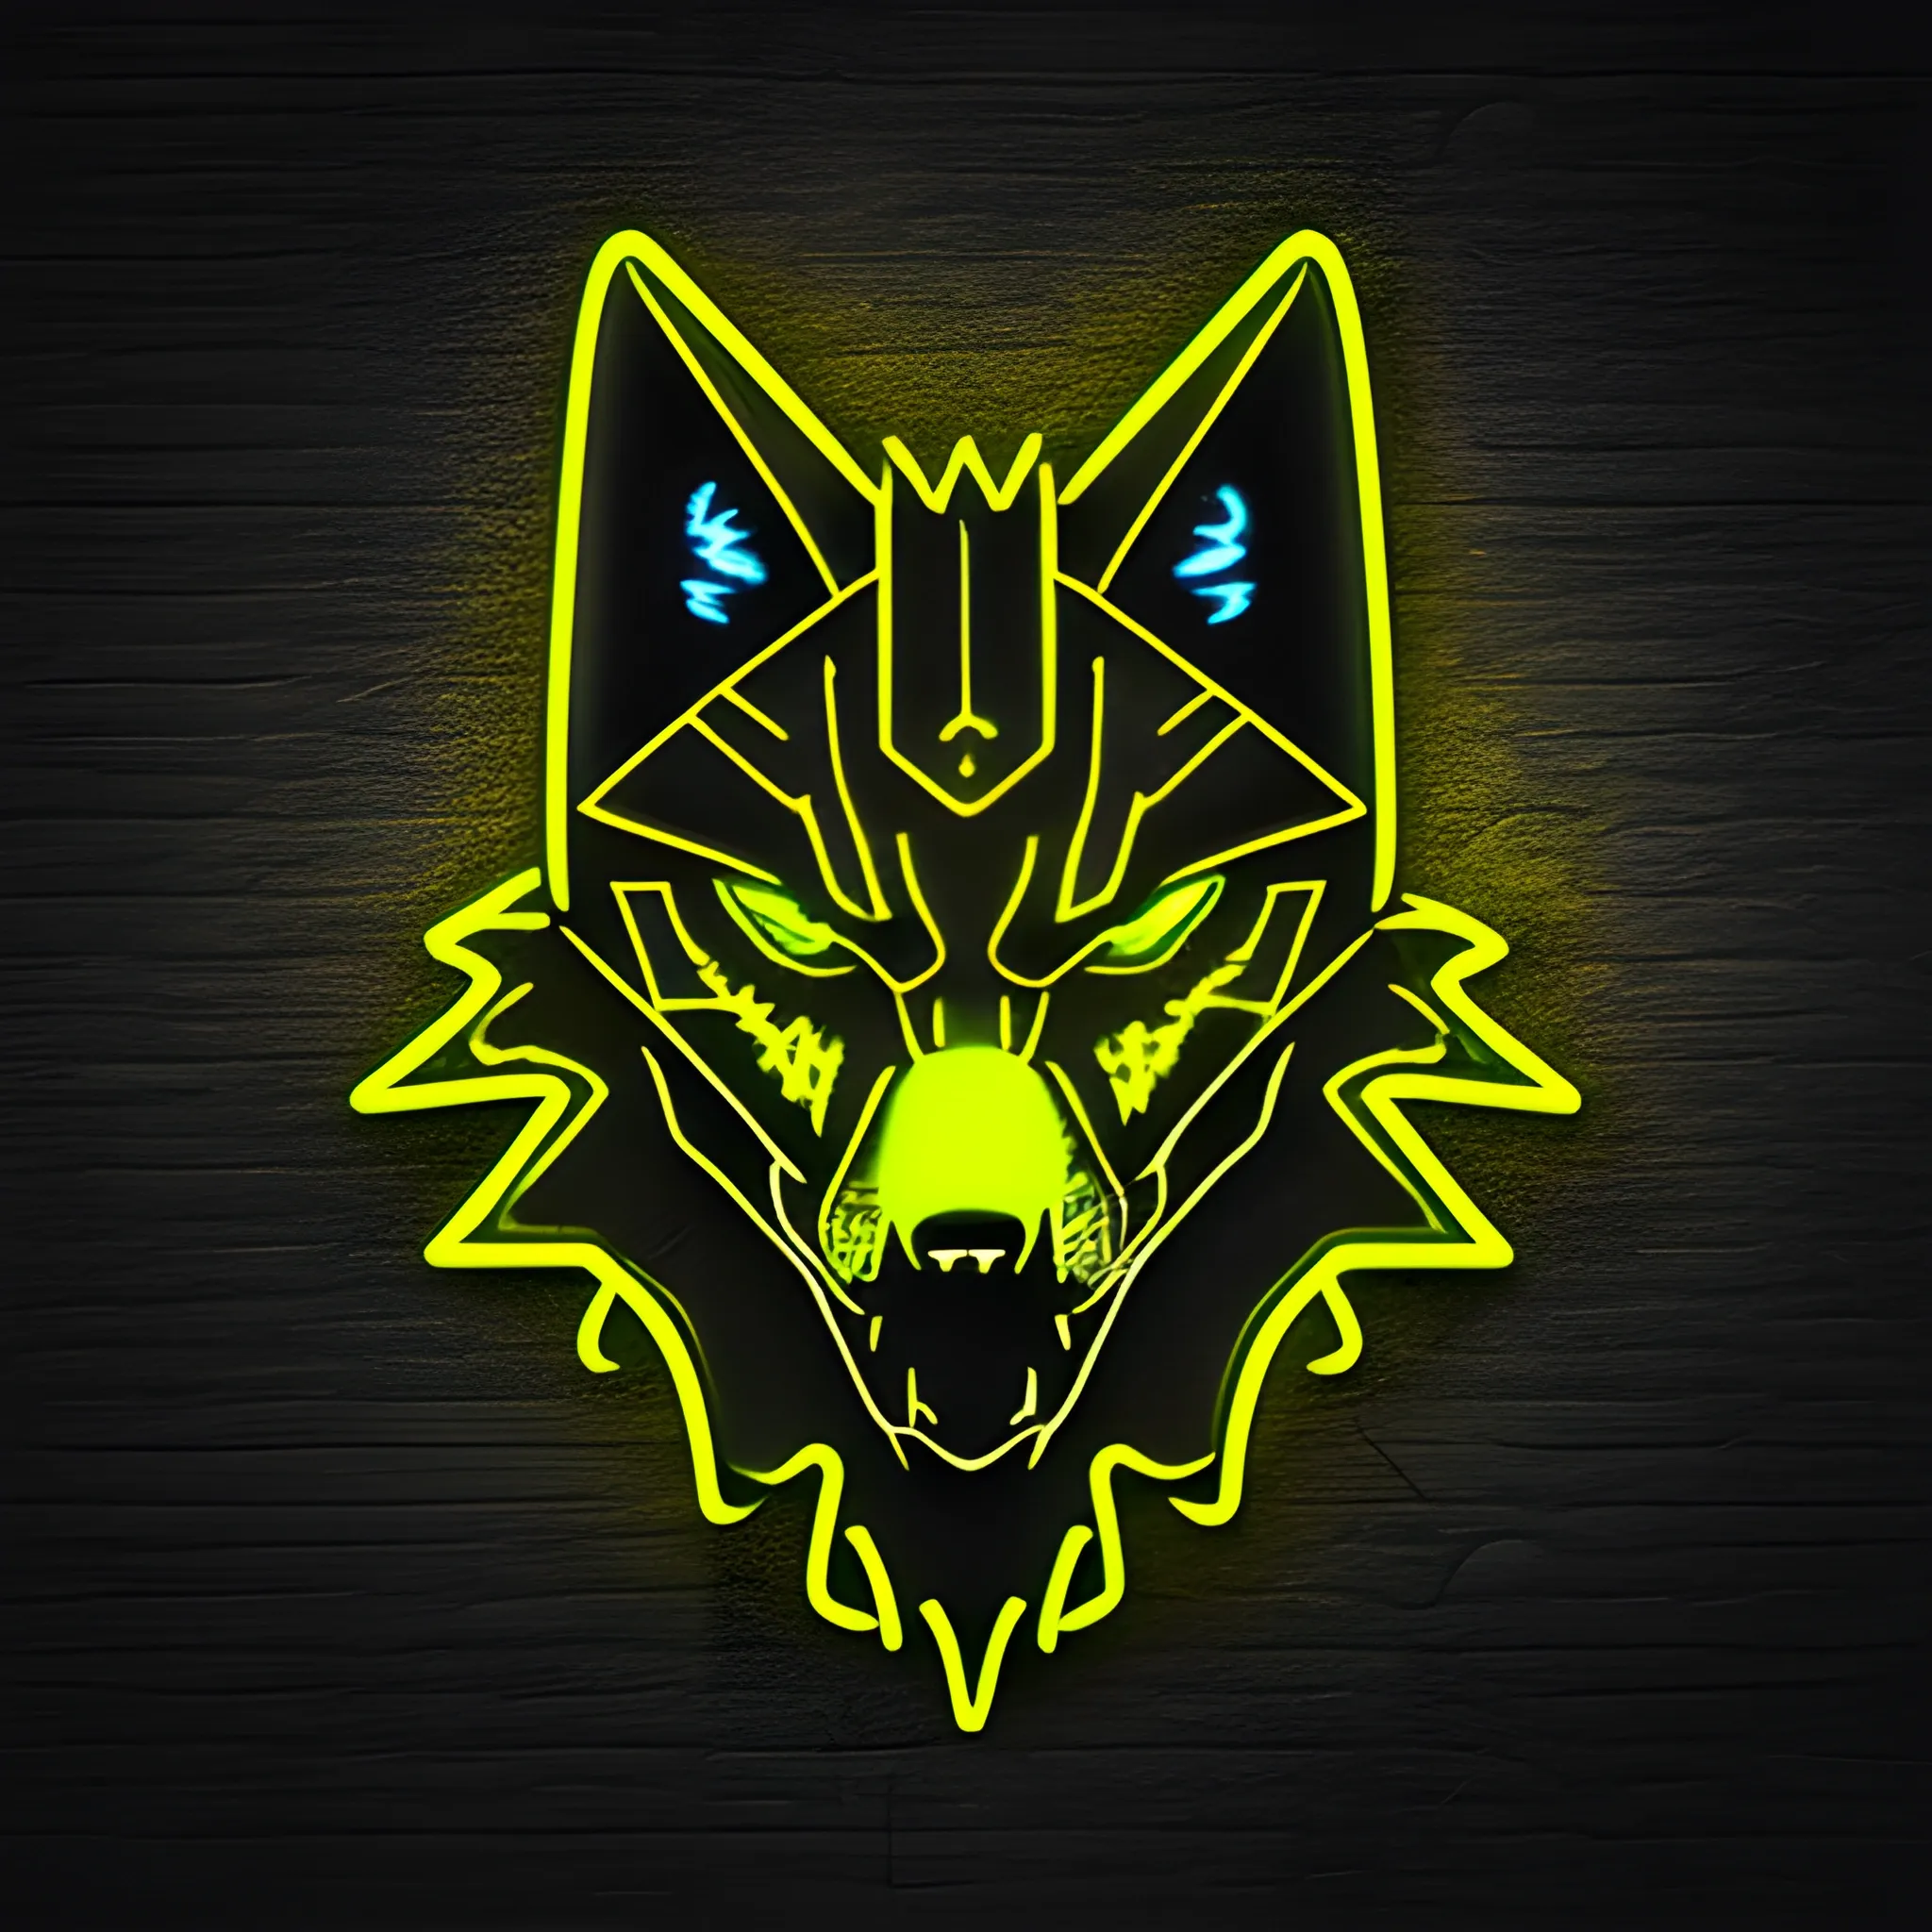 An angry cyberpunk wolf logo, using the yellow neon color, with an "A"at the background